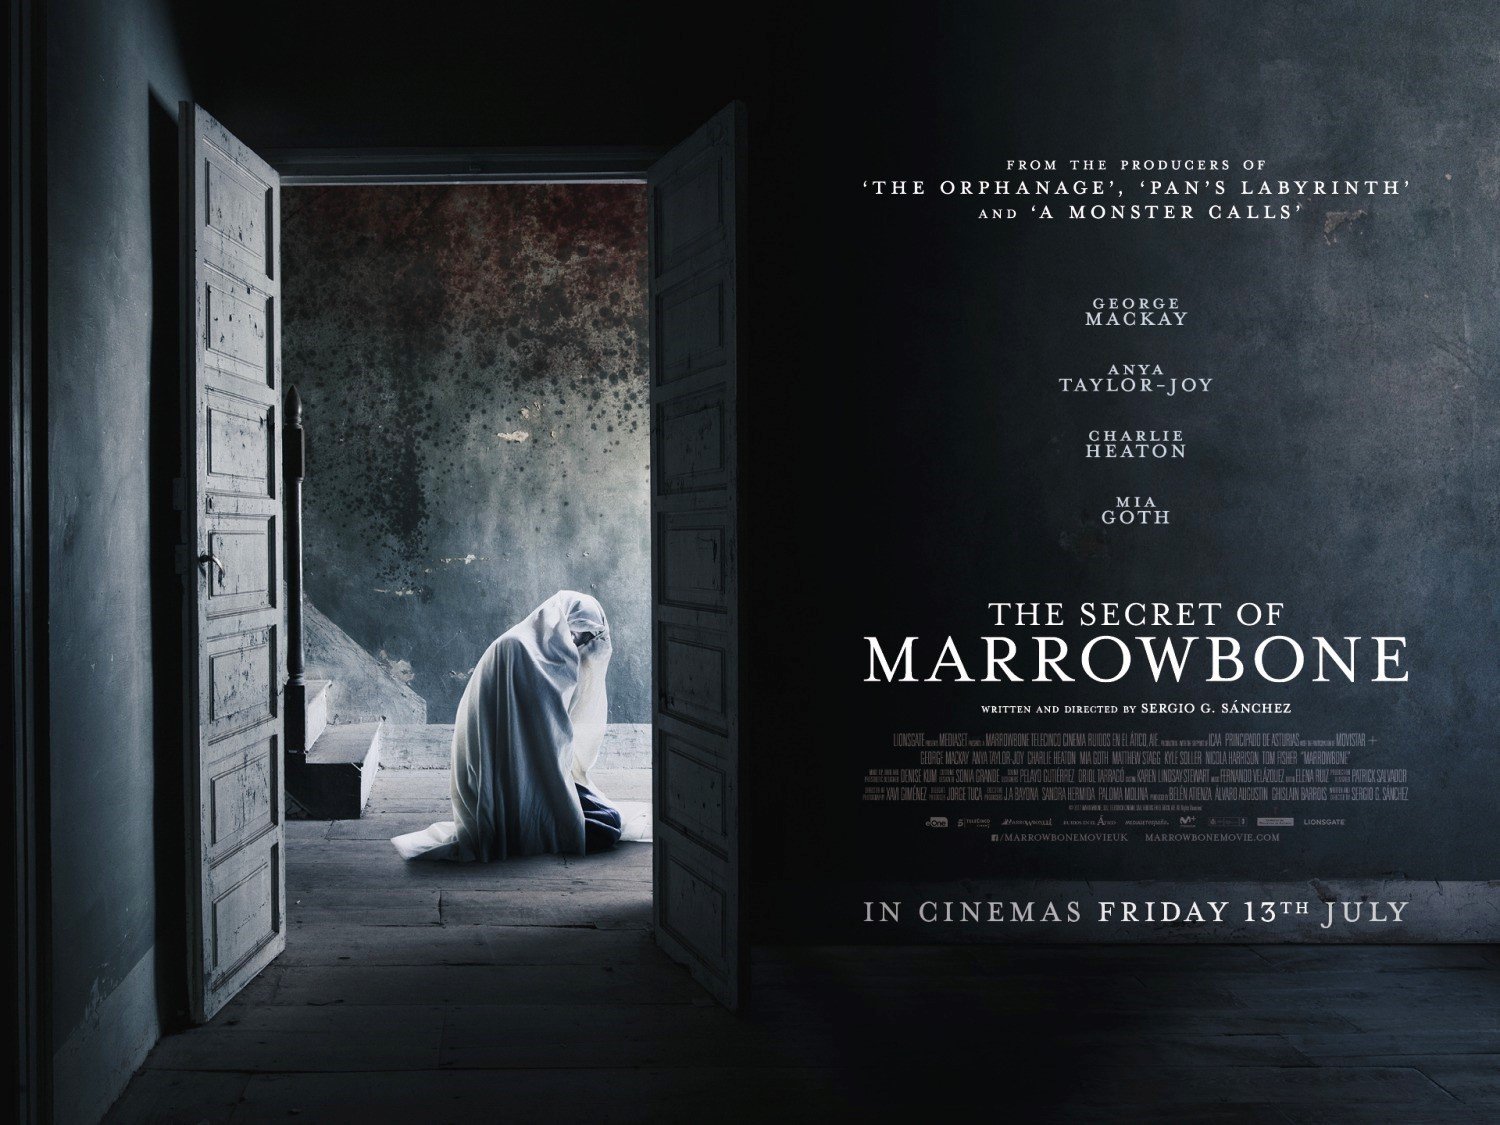 Poster of Magnet Releasing's Marrowbone (2018)